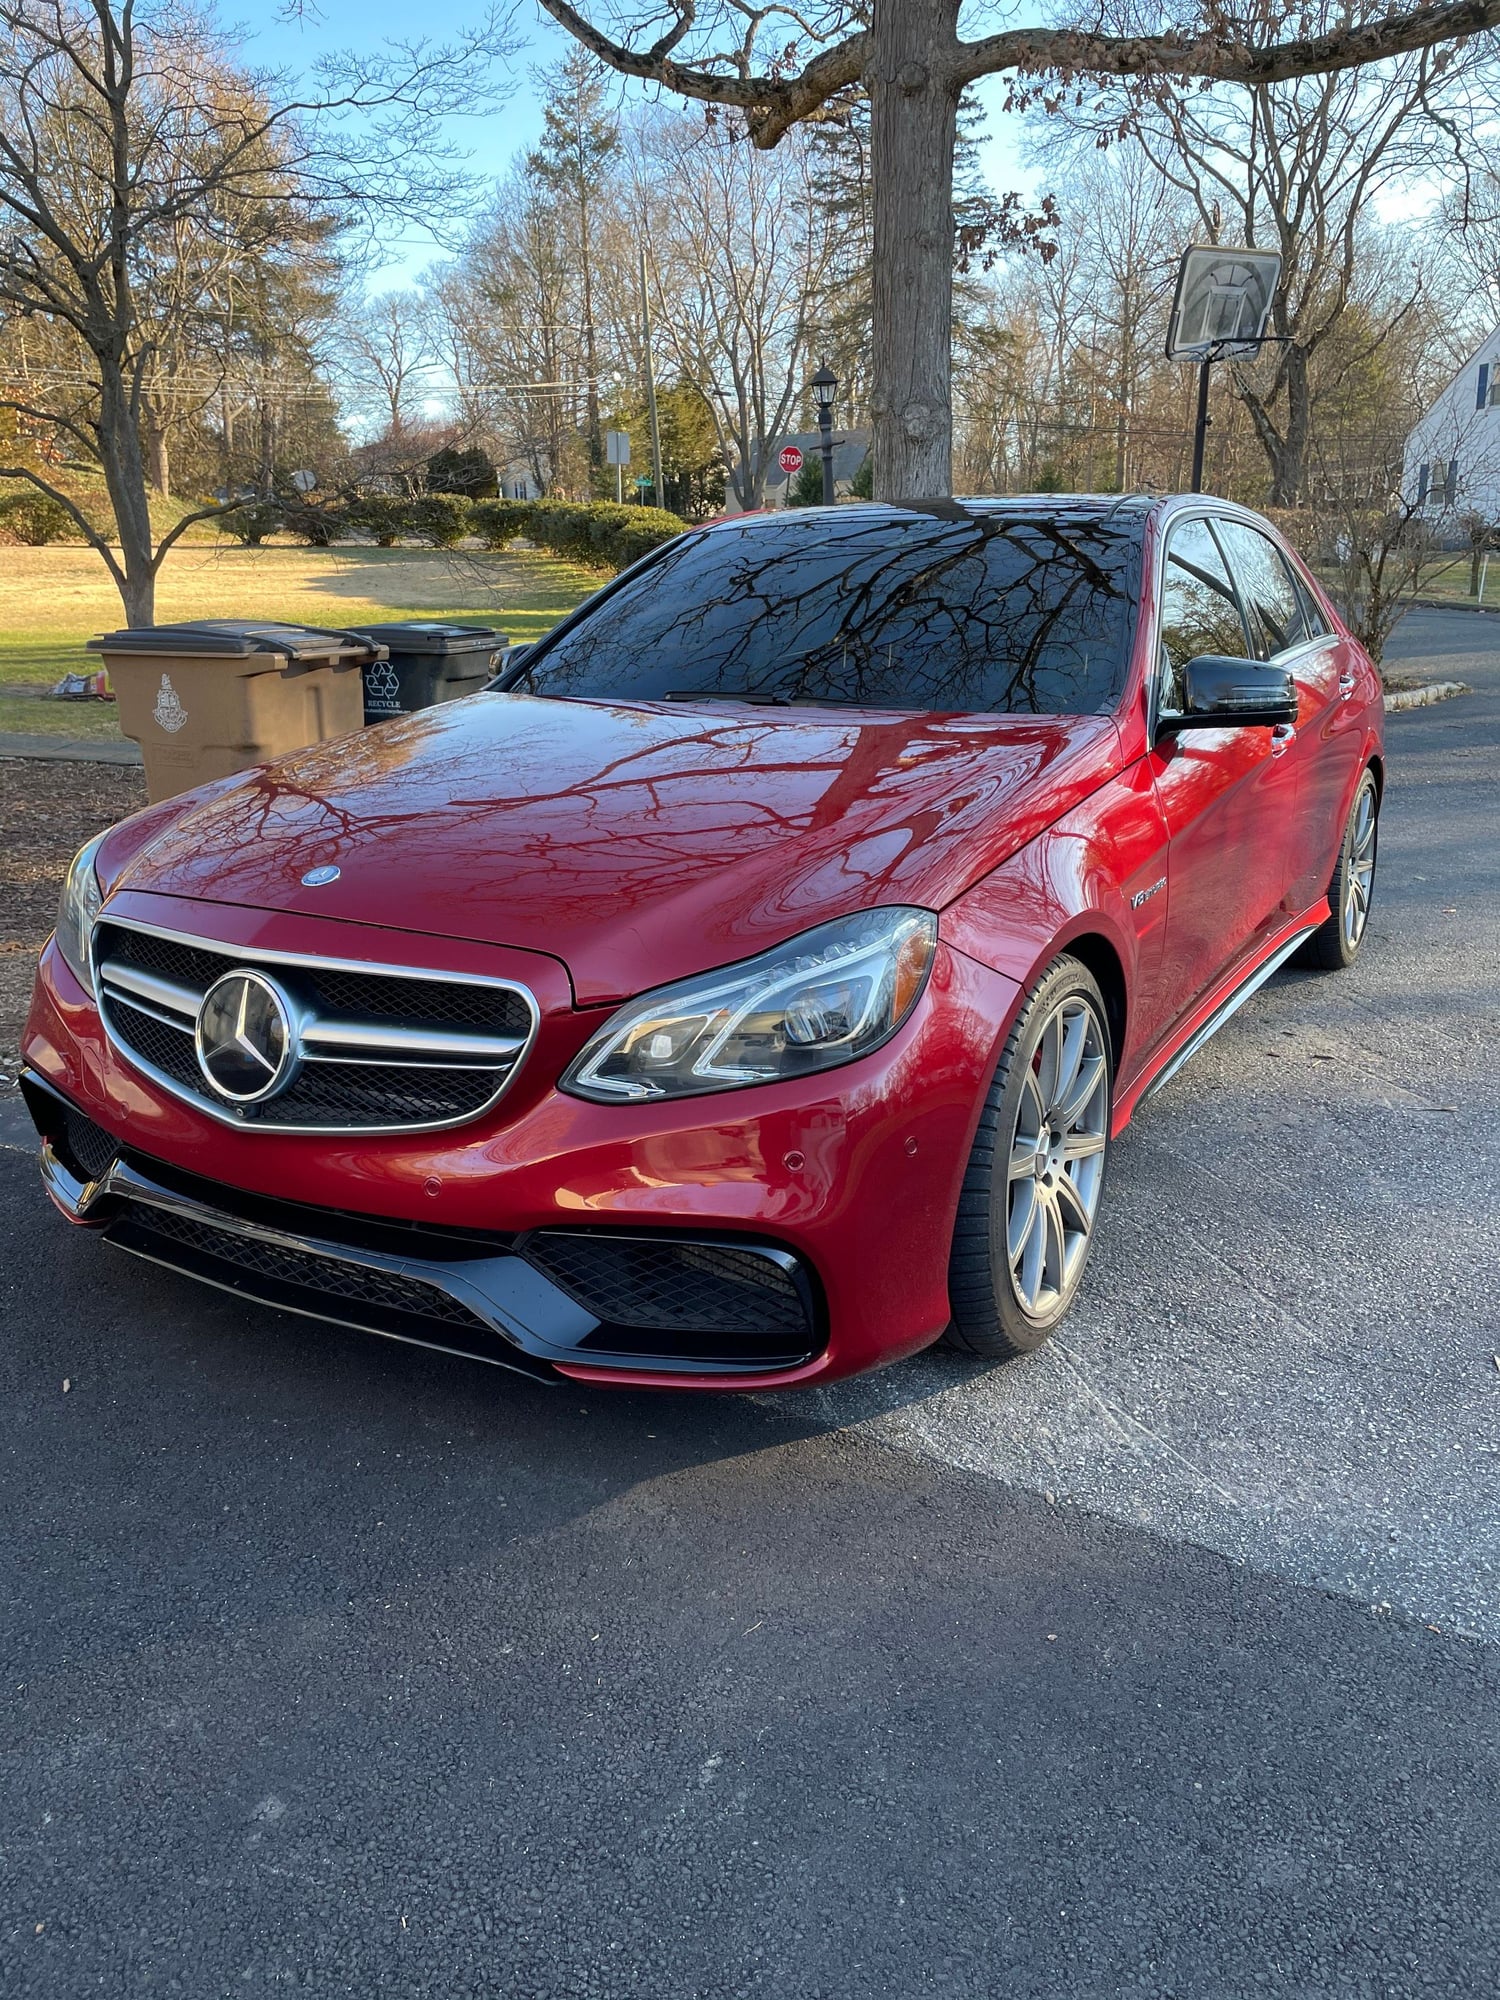 2014 Mercedes-Benz E63 AMG S - considering selling '14 cardinal red e63s - Used - VIN wddhf7gb4ea973911 - 92,000 Miles - Red - Stamford, CT 06905, United States